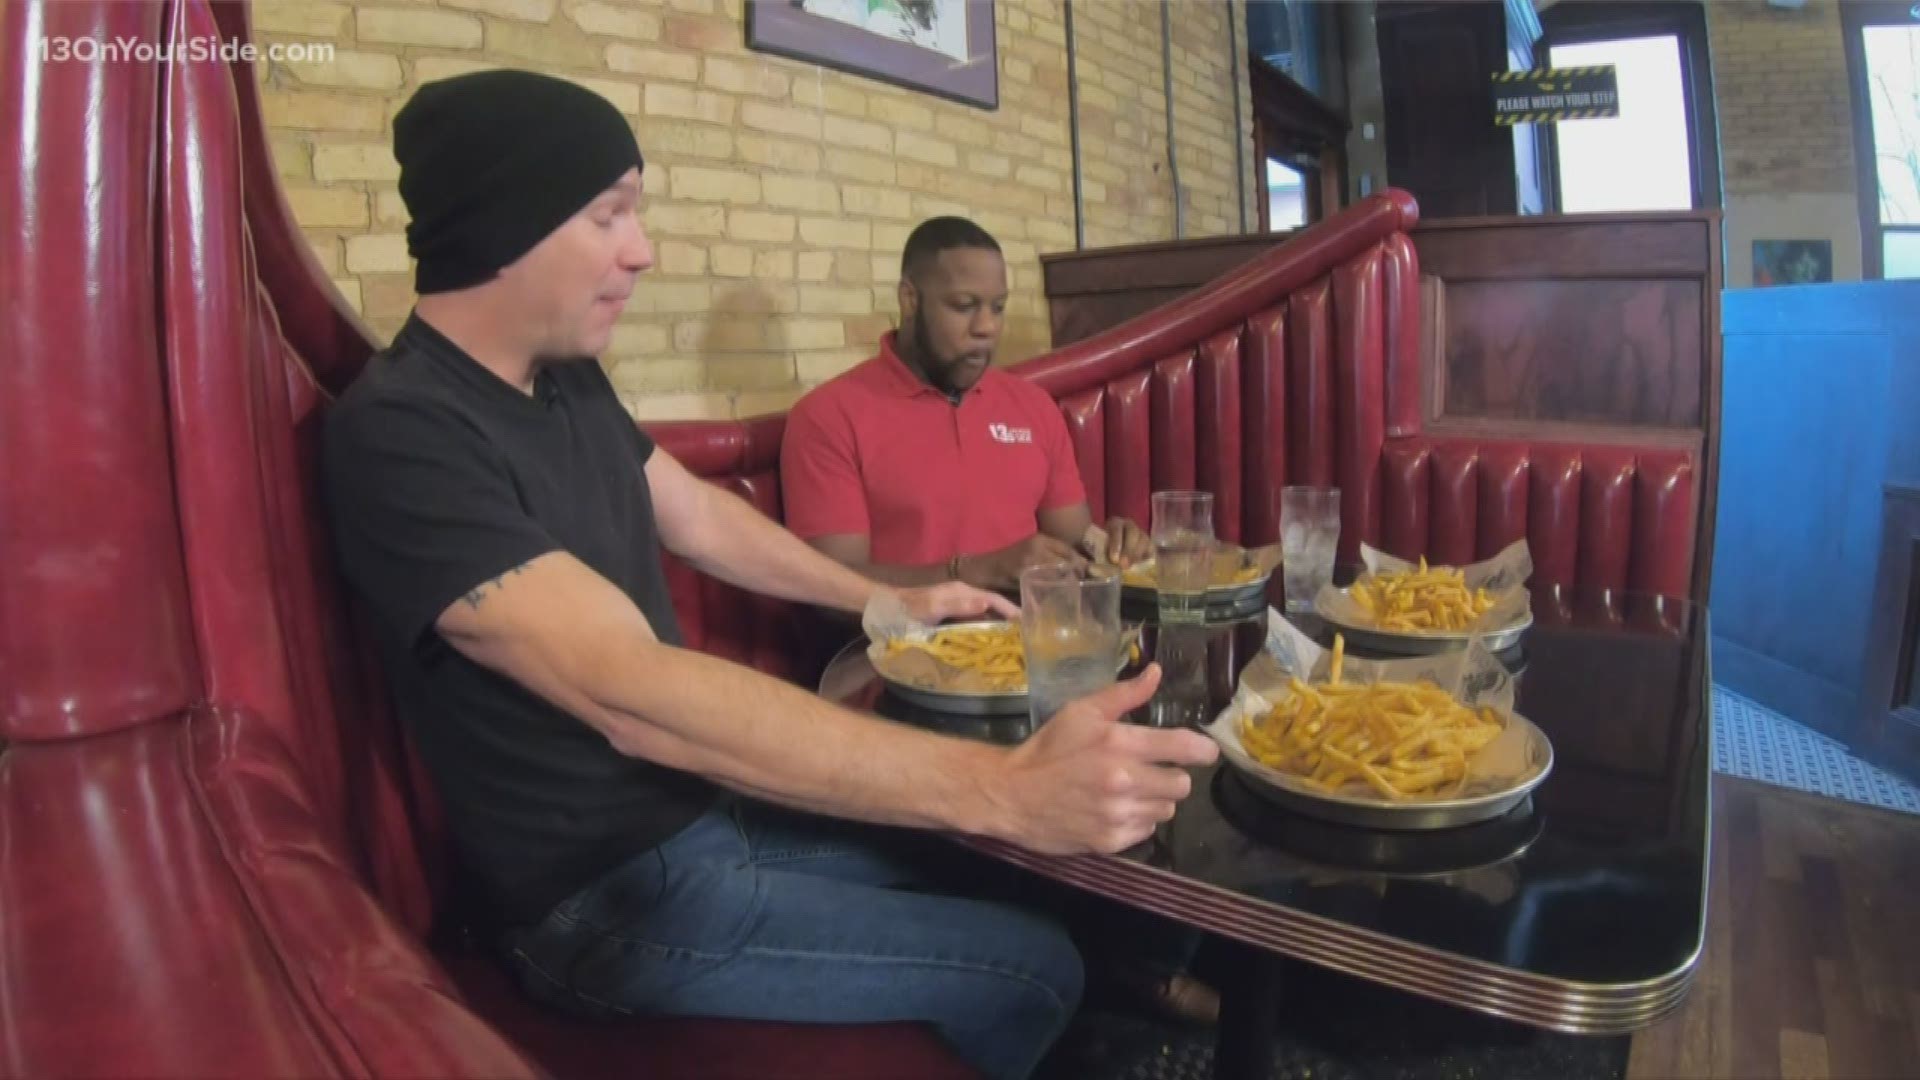 In this edition of Let's Eat, James and Dave go head-to-head in a HopCat Cosmik fry eating challenge. See who comes out on top!